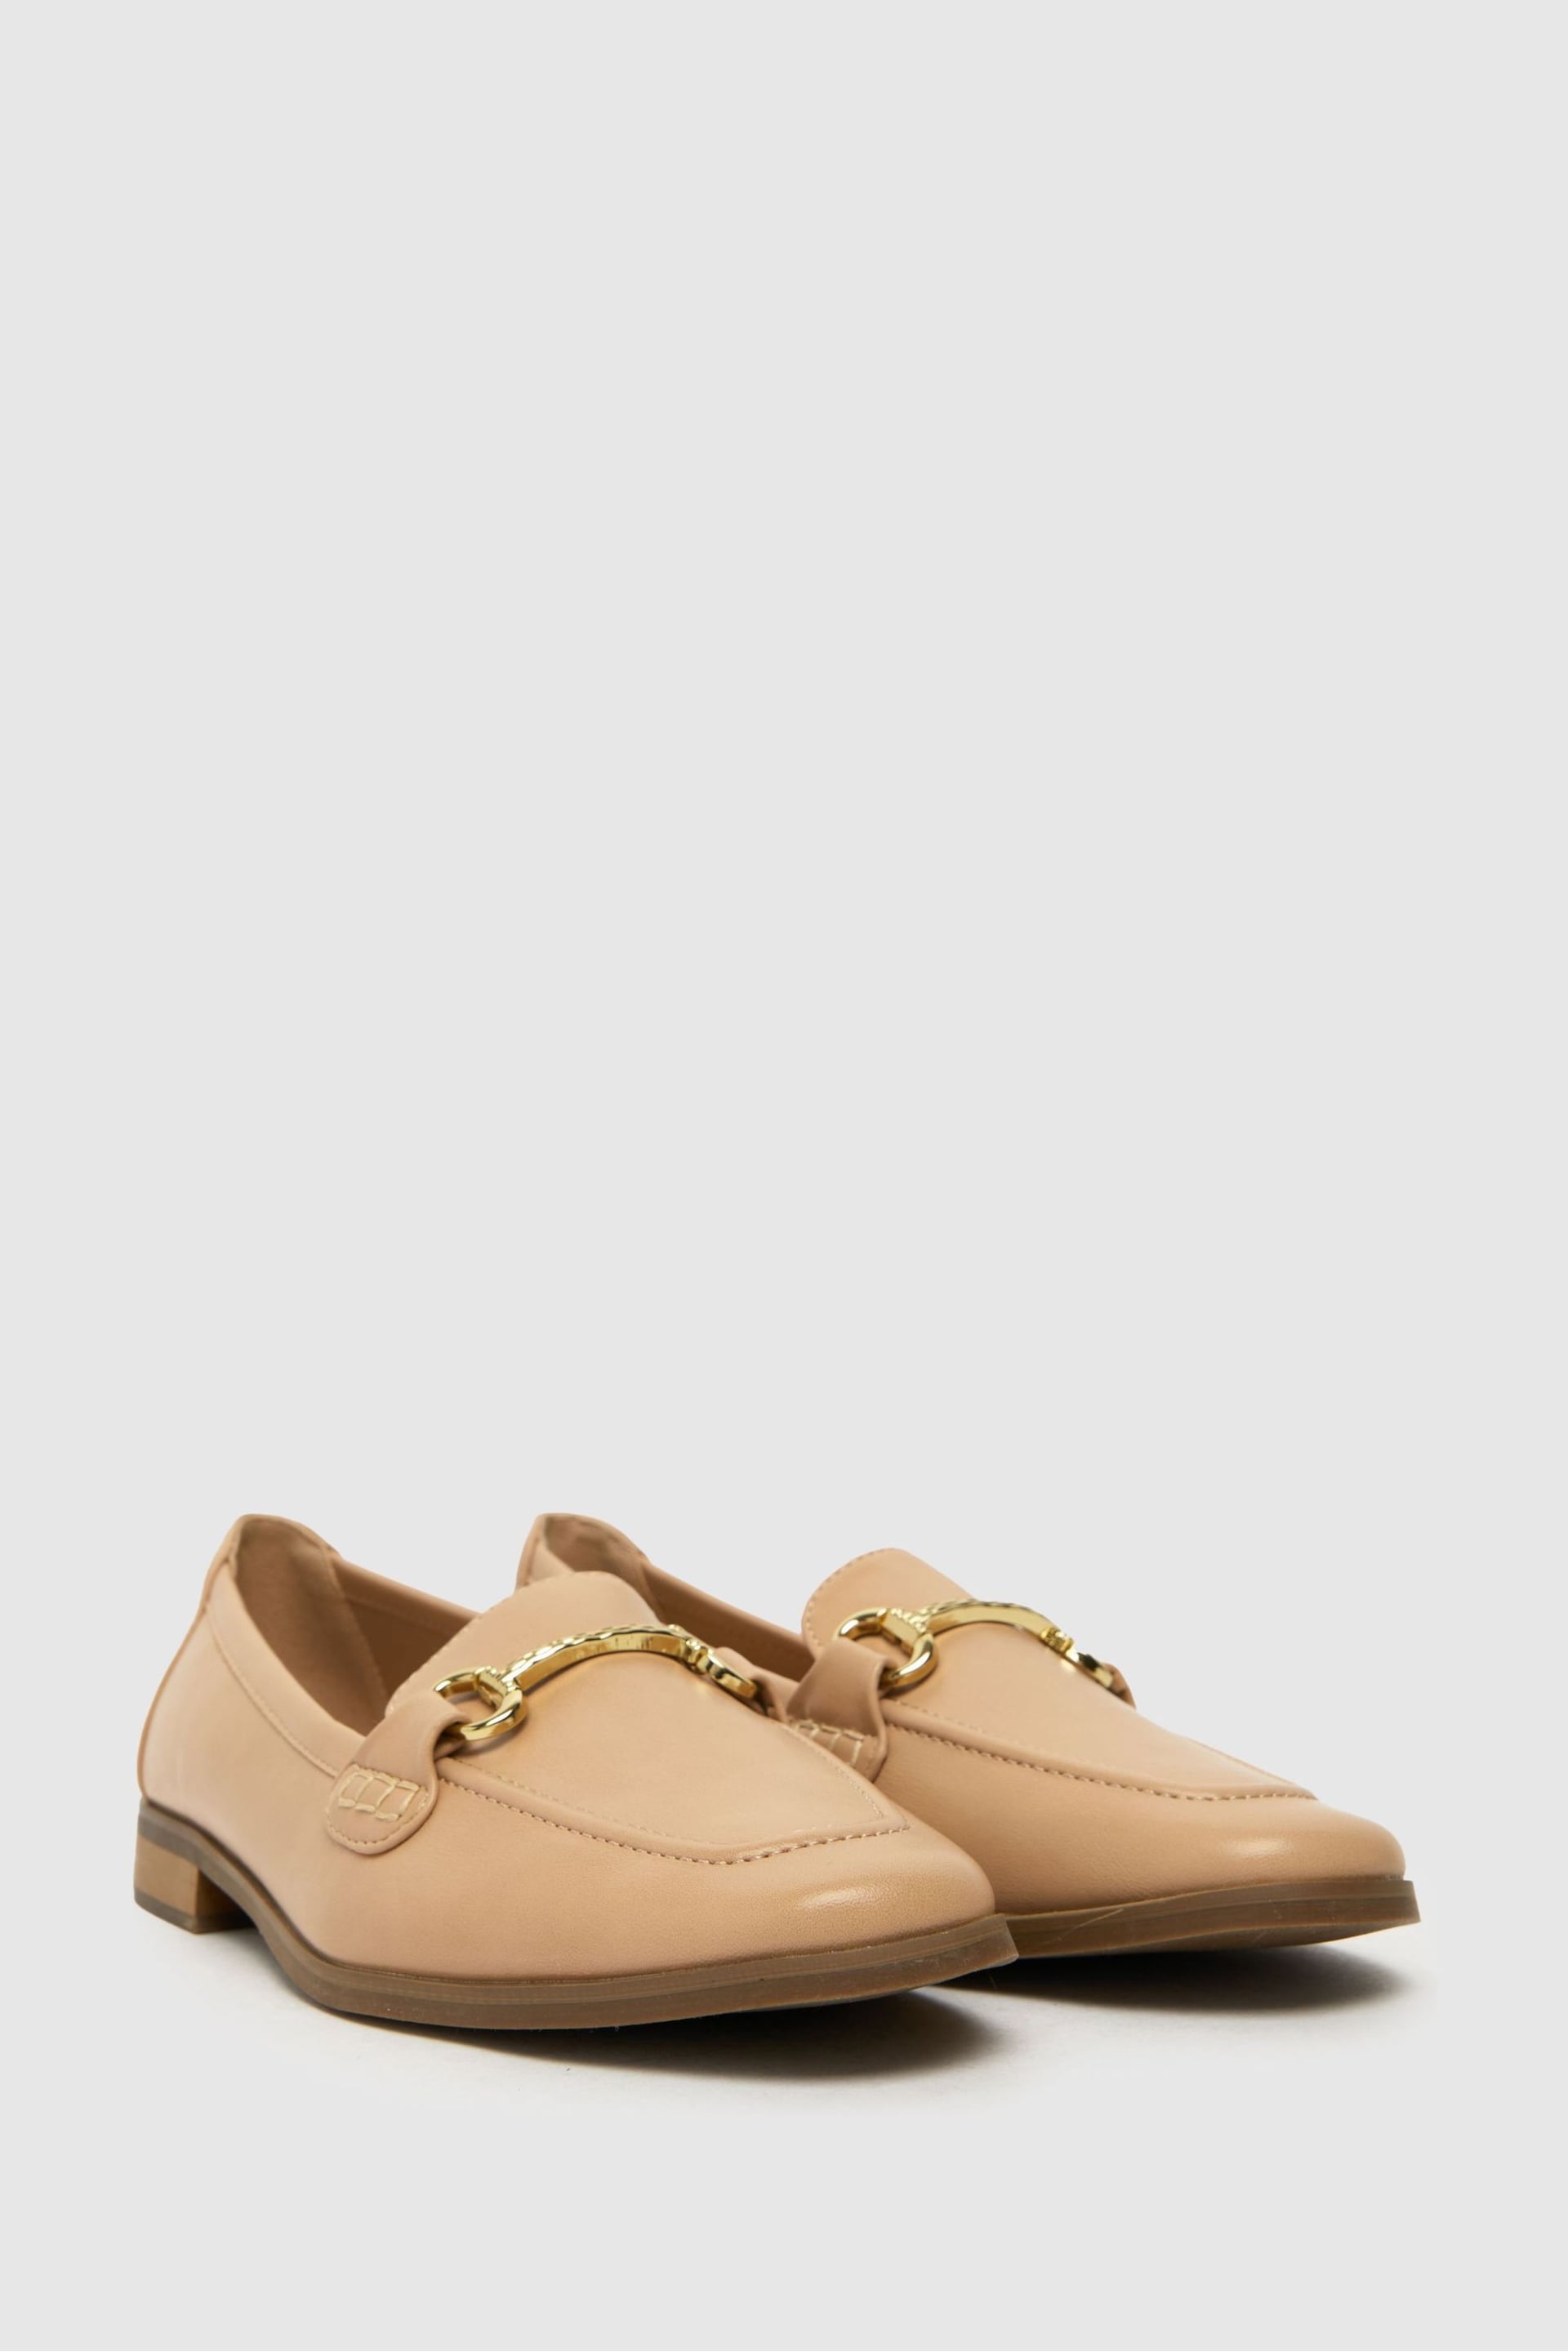 Schuh Lucena Snaffle Loafers - Image 2 of 4